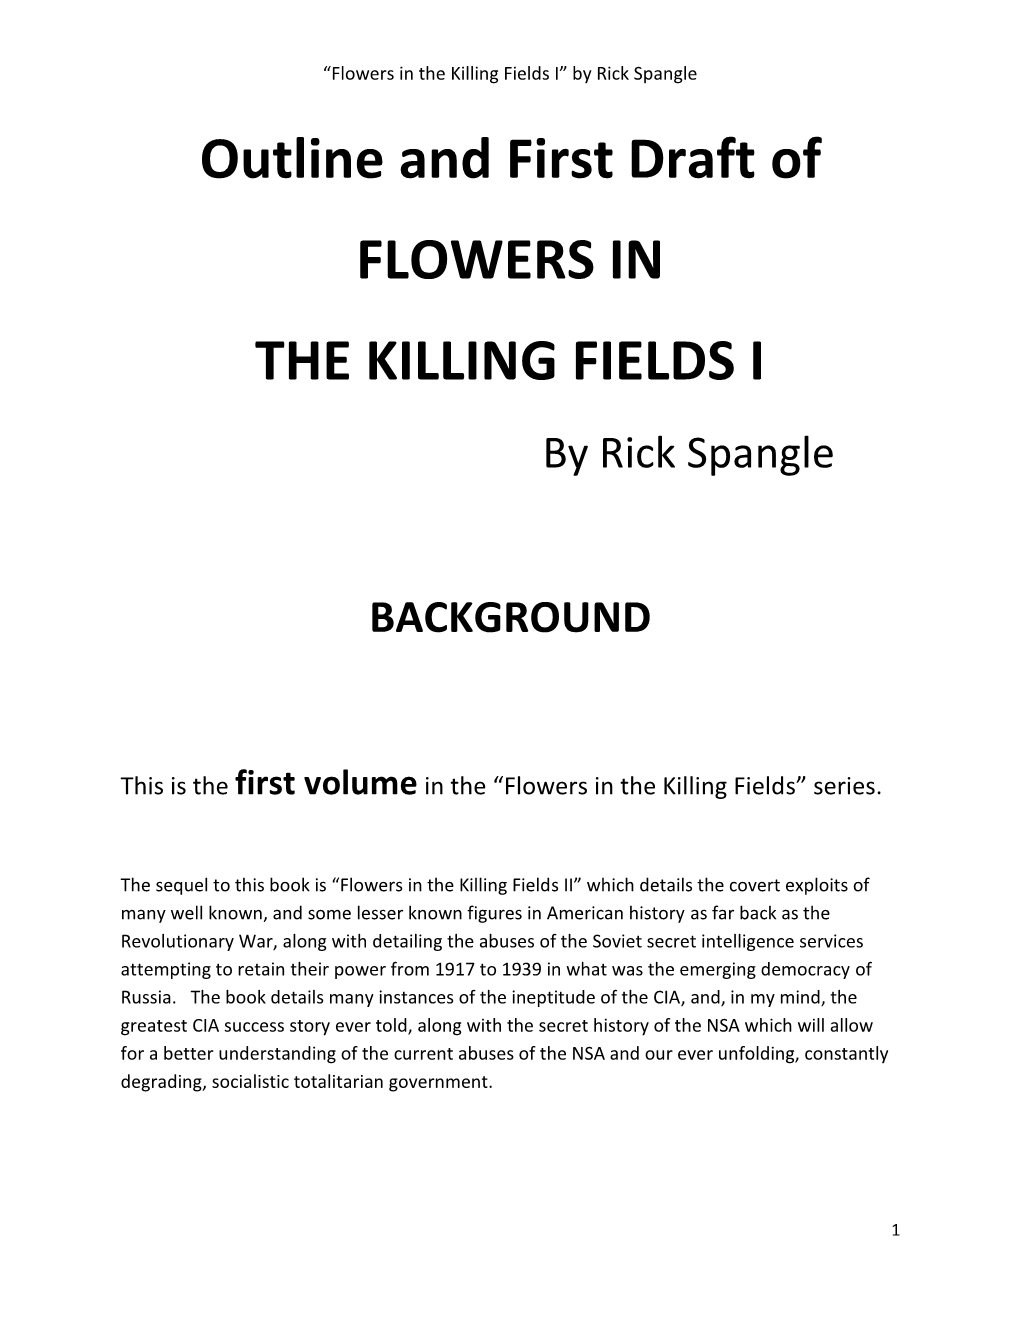 Outline and First Draft of FLOWERS in the KILLING FIELDS I by Rick Spangle